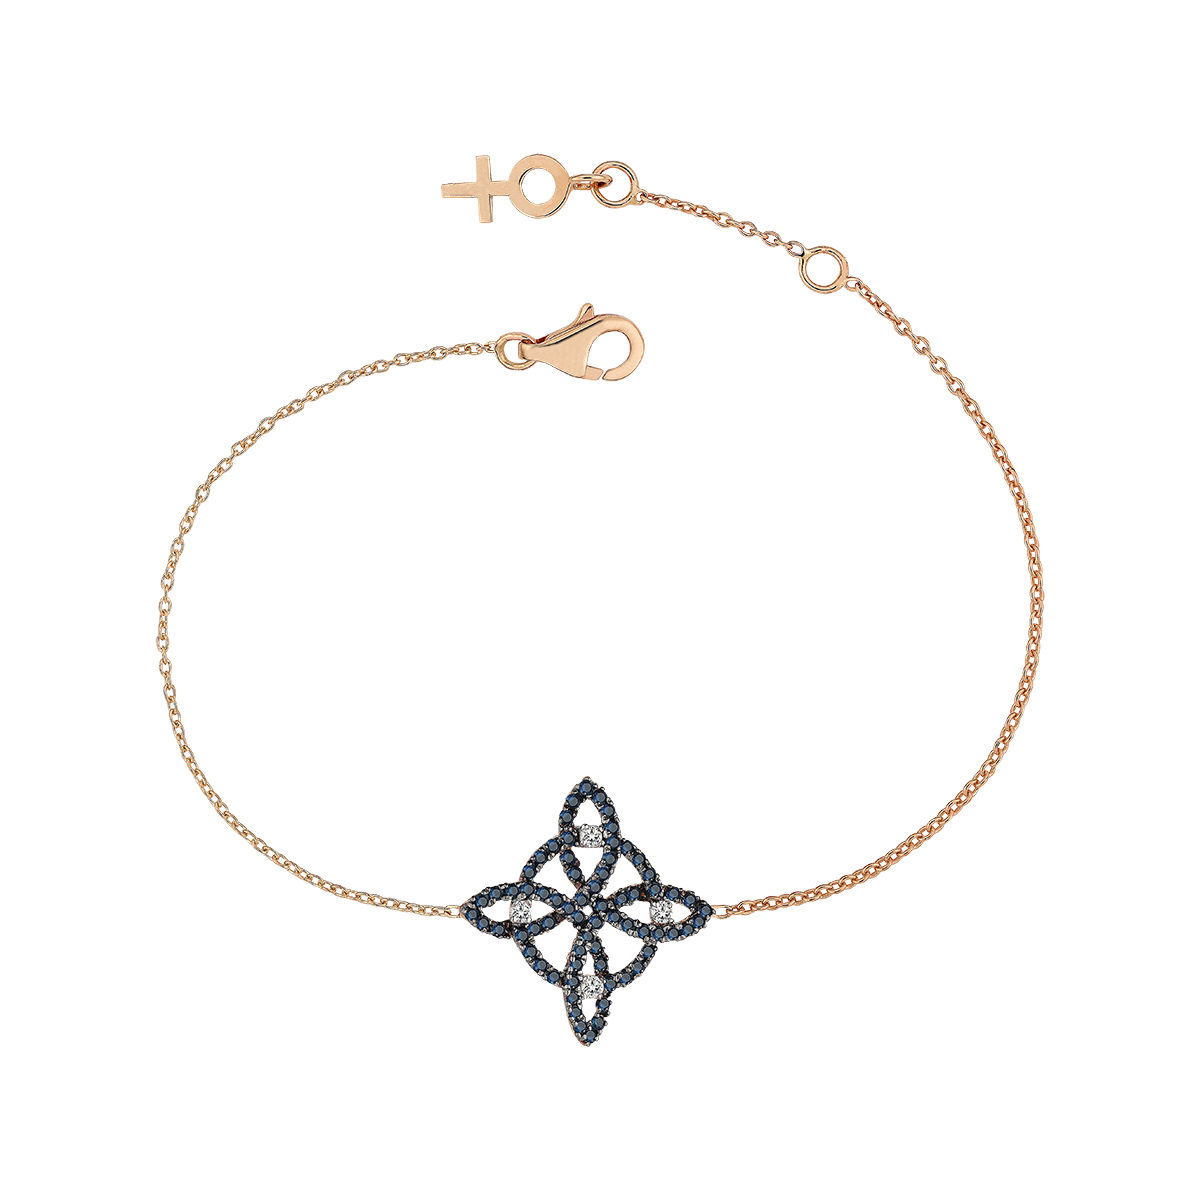 Full Magic Knot in Rose Gold - Her Story Shop